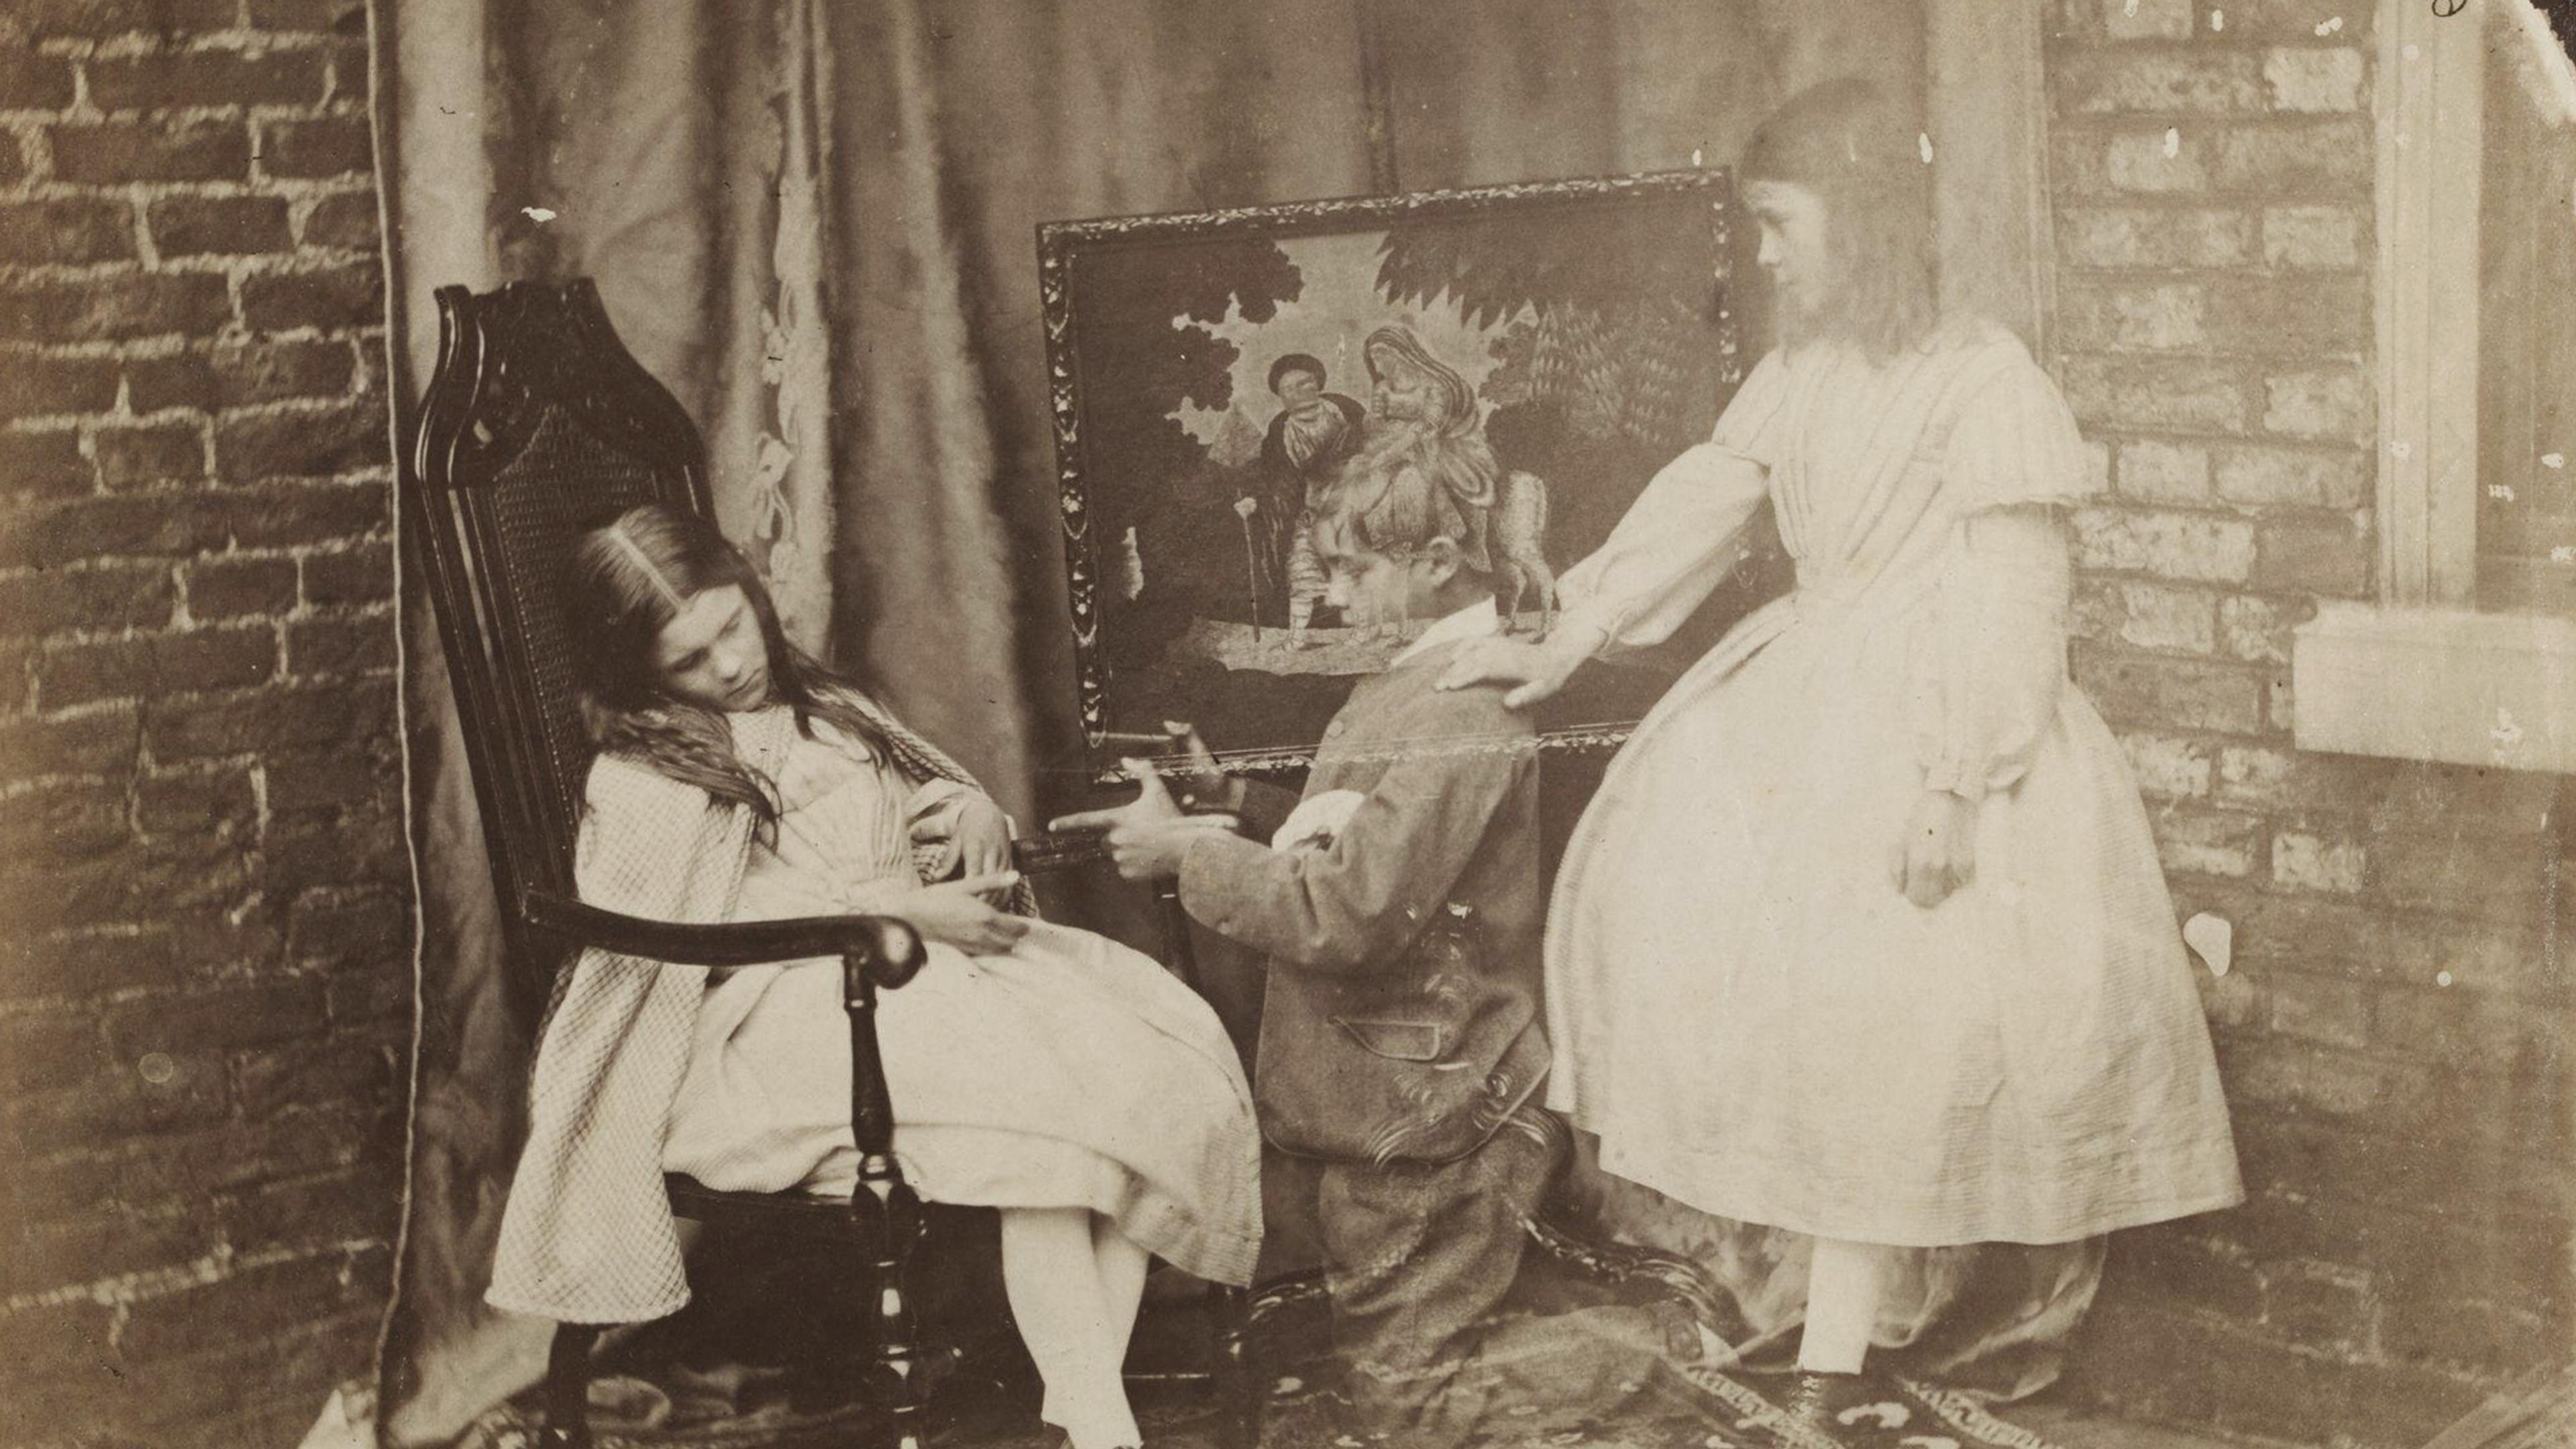 Old photograph of a girl sleeping in a chair, a ghostly boy kneeling before her, and a ghostly girl standing by a wall with a religious tapestry.